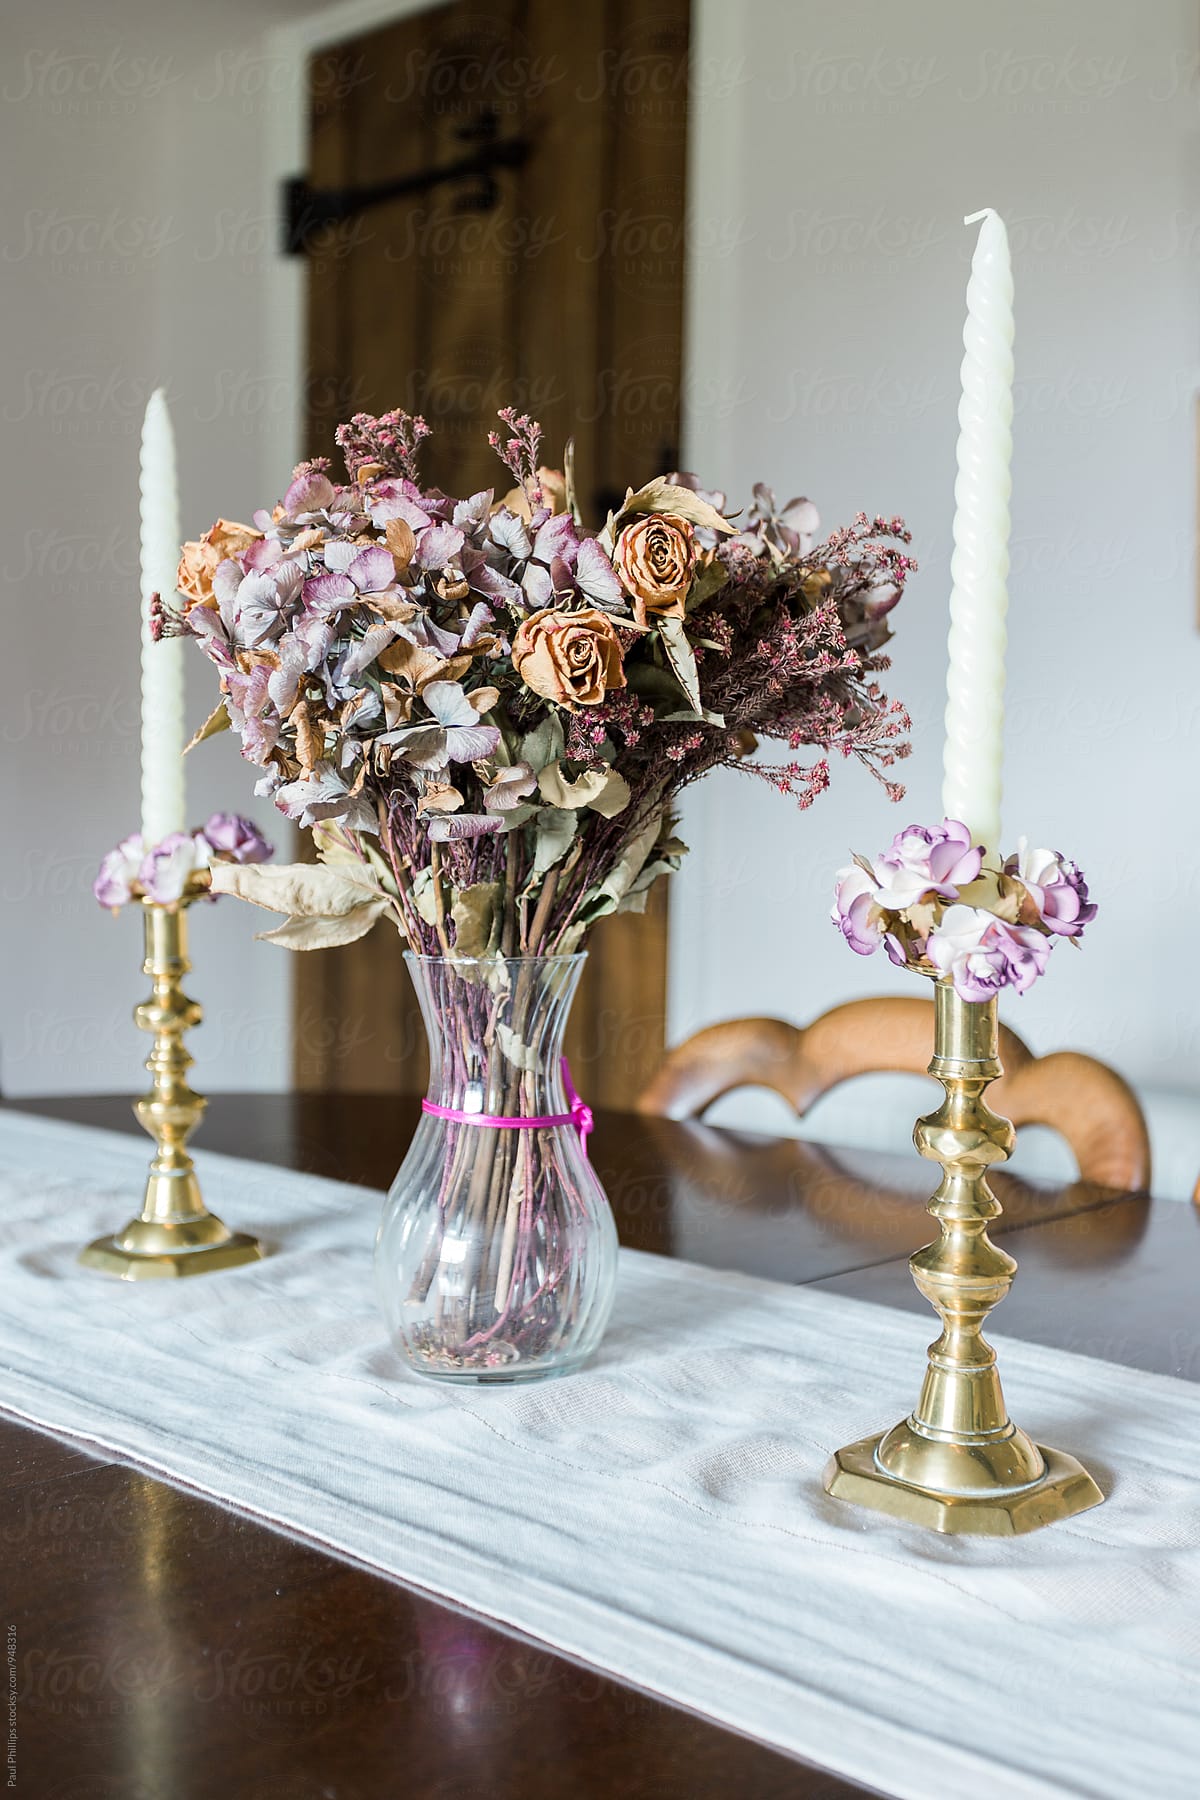 Dried flower display on a antique table setting.